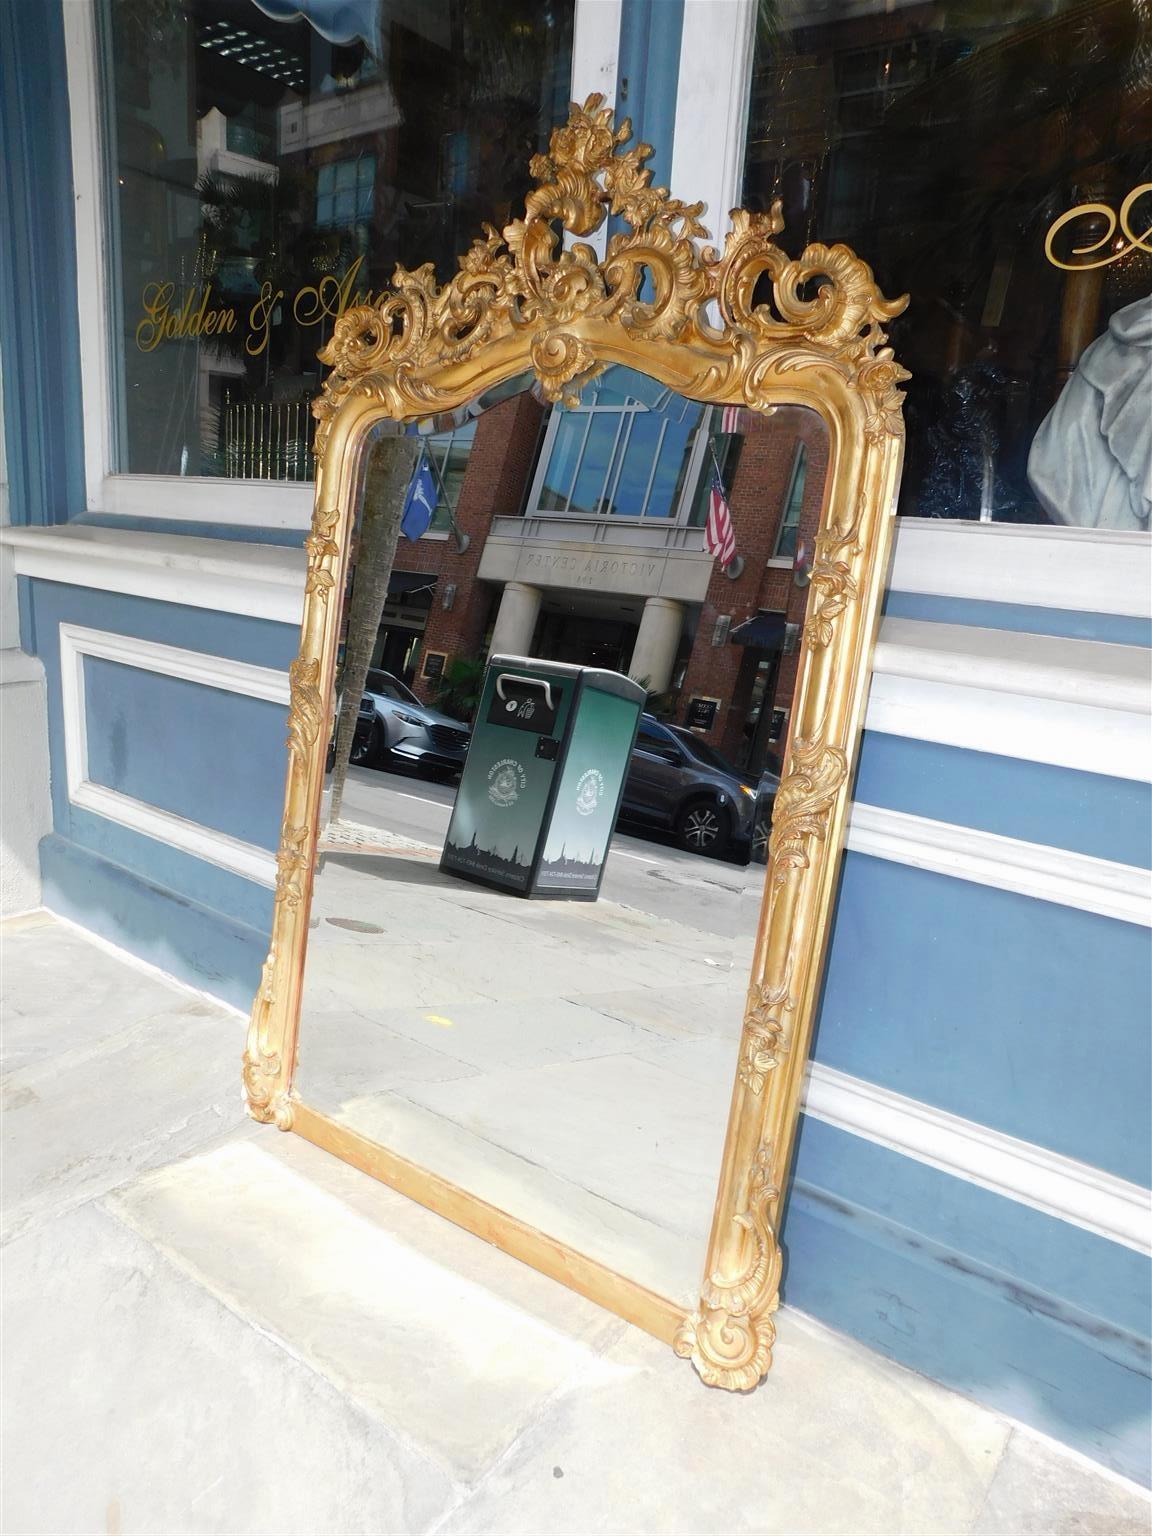 French gilt carved wood and gesso foliage wall mirror with the original beveled glass. Mirror retains the original wood backing, early 19th century.